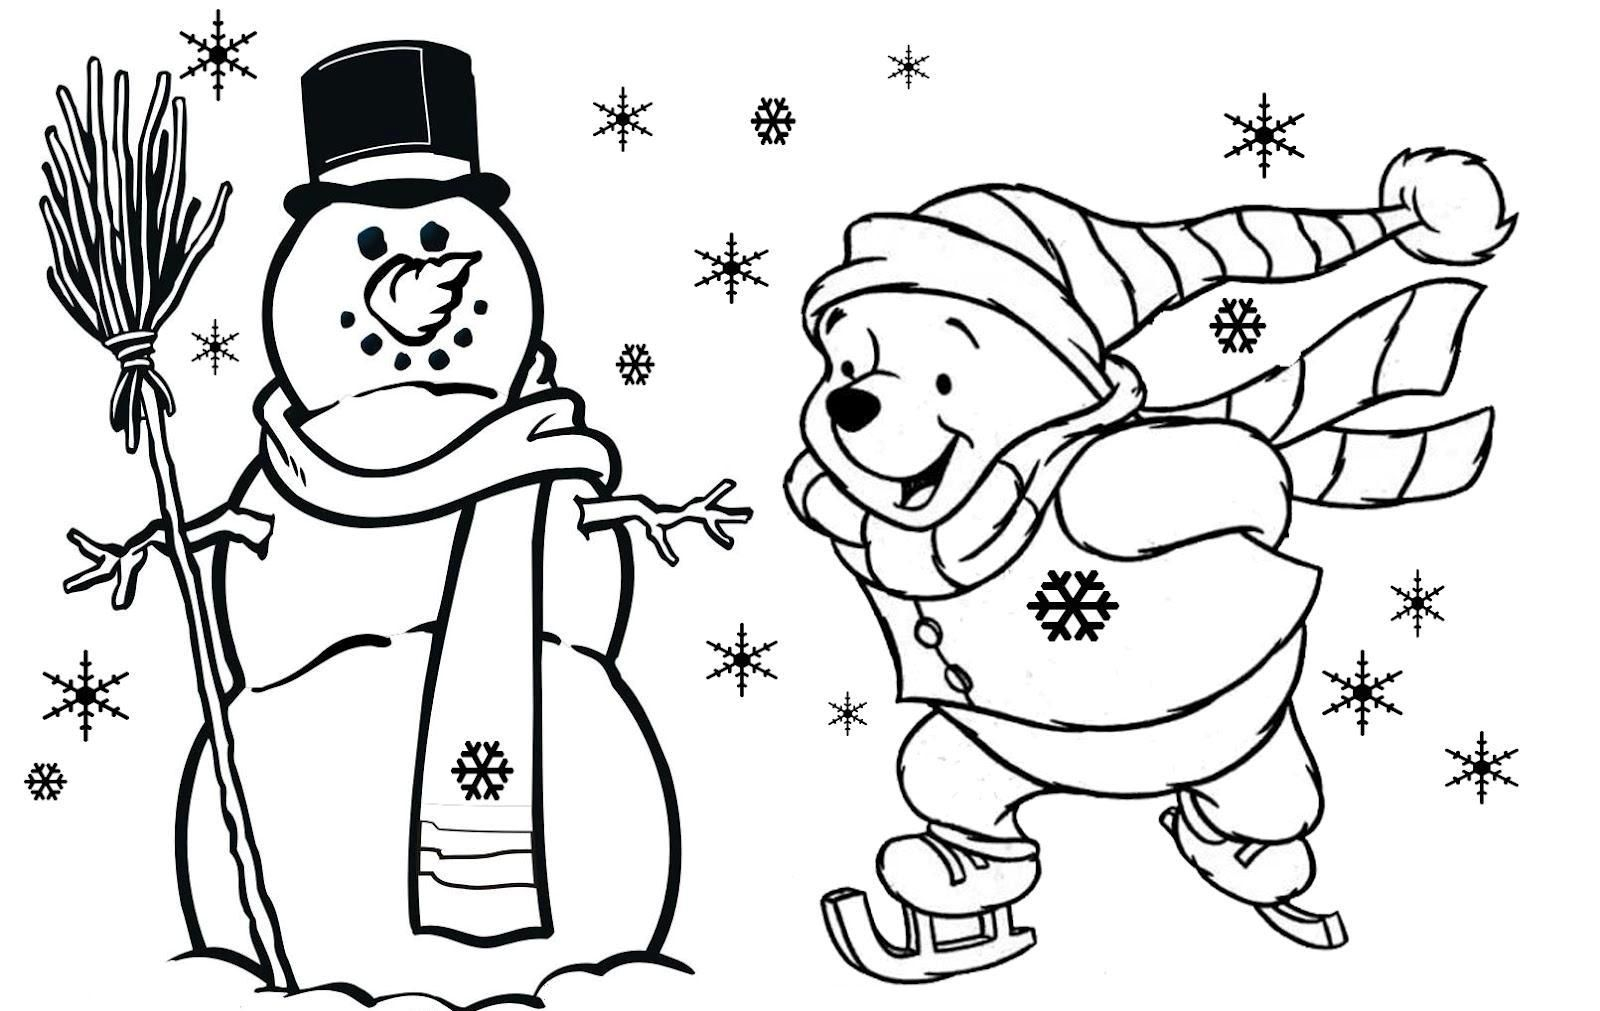 Free Printable Christmas Coloring Pages For Toddlers Coloring Pages Childrens Christmas Coloring Pages Free Printable